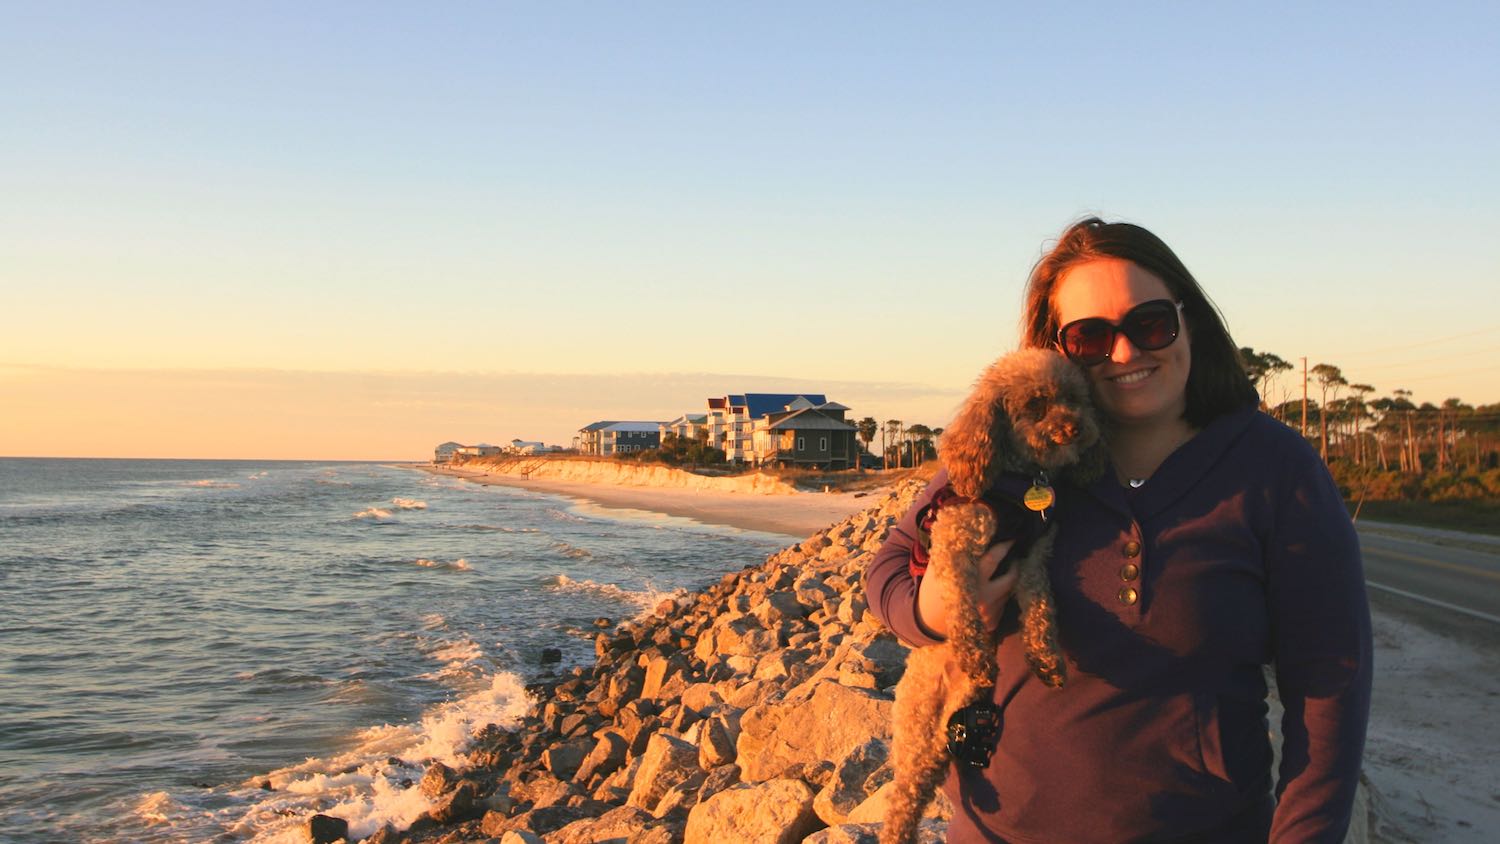 Katie Bean and her dog named Coco Bean at St. George Island, Florida by the ocean.